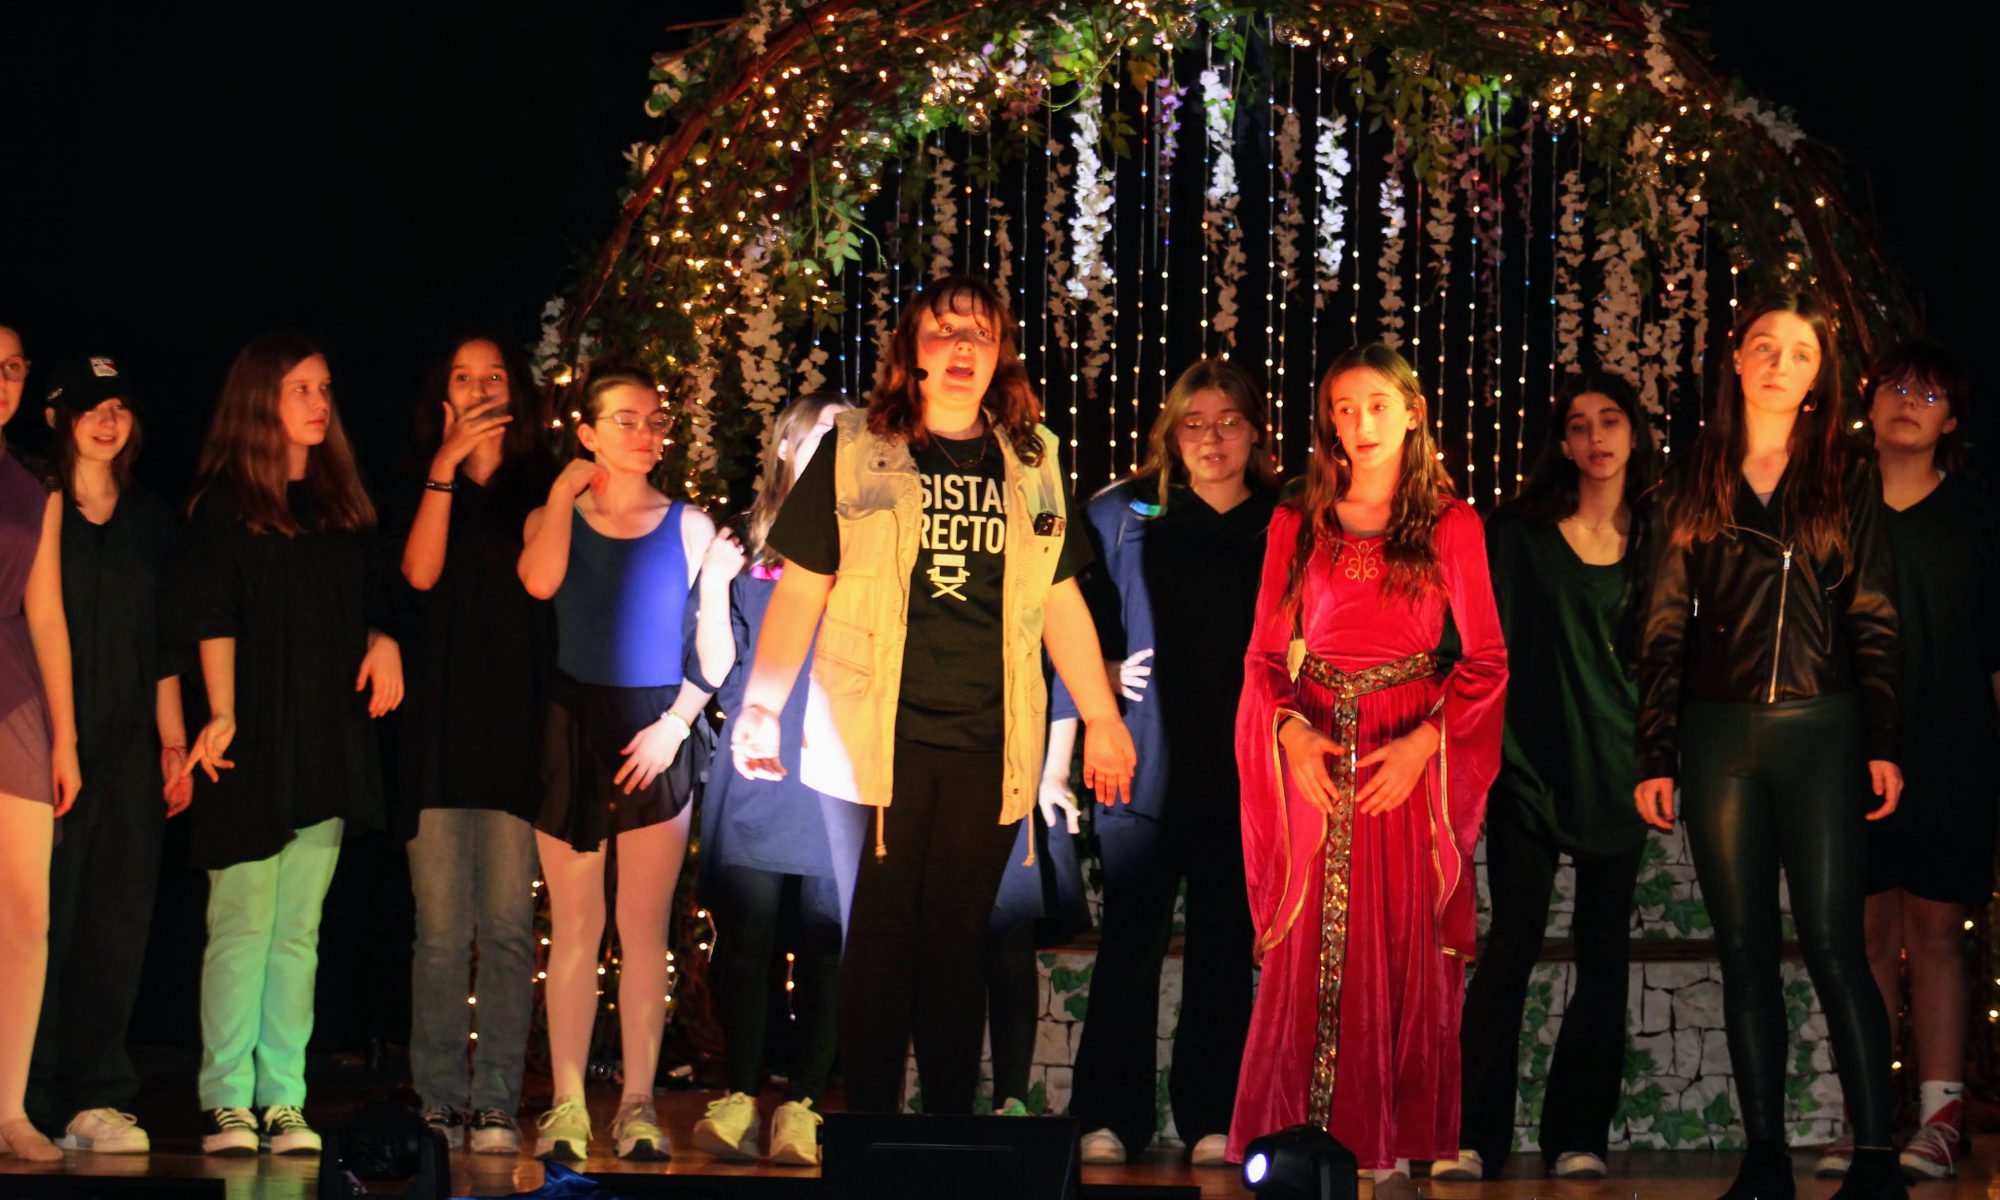 VCMS Students perform their musical revue, "All the World's a Stage" on November 16. One student is center singing surrounded by other students on the stage.